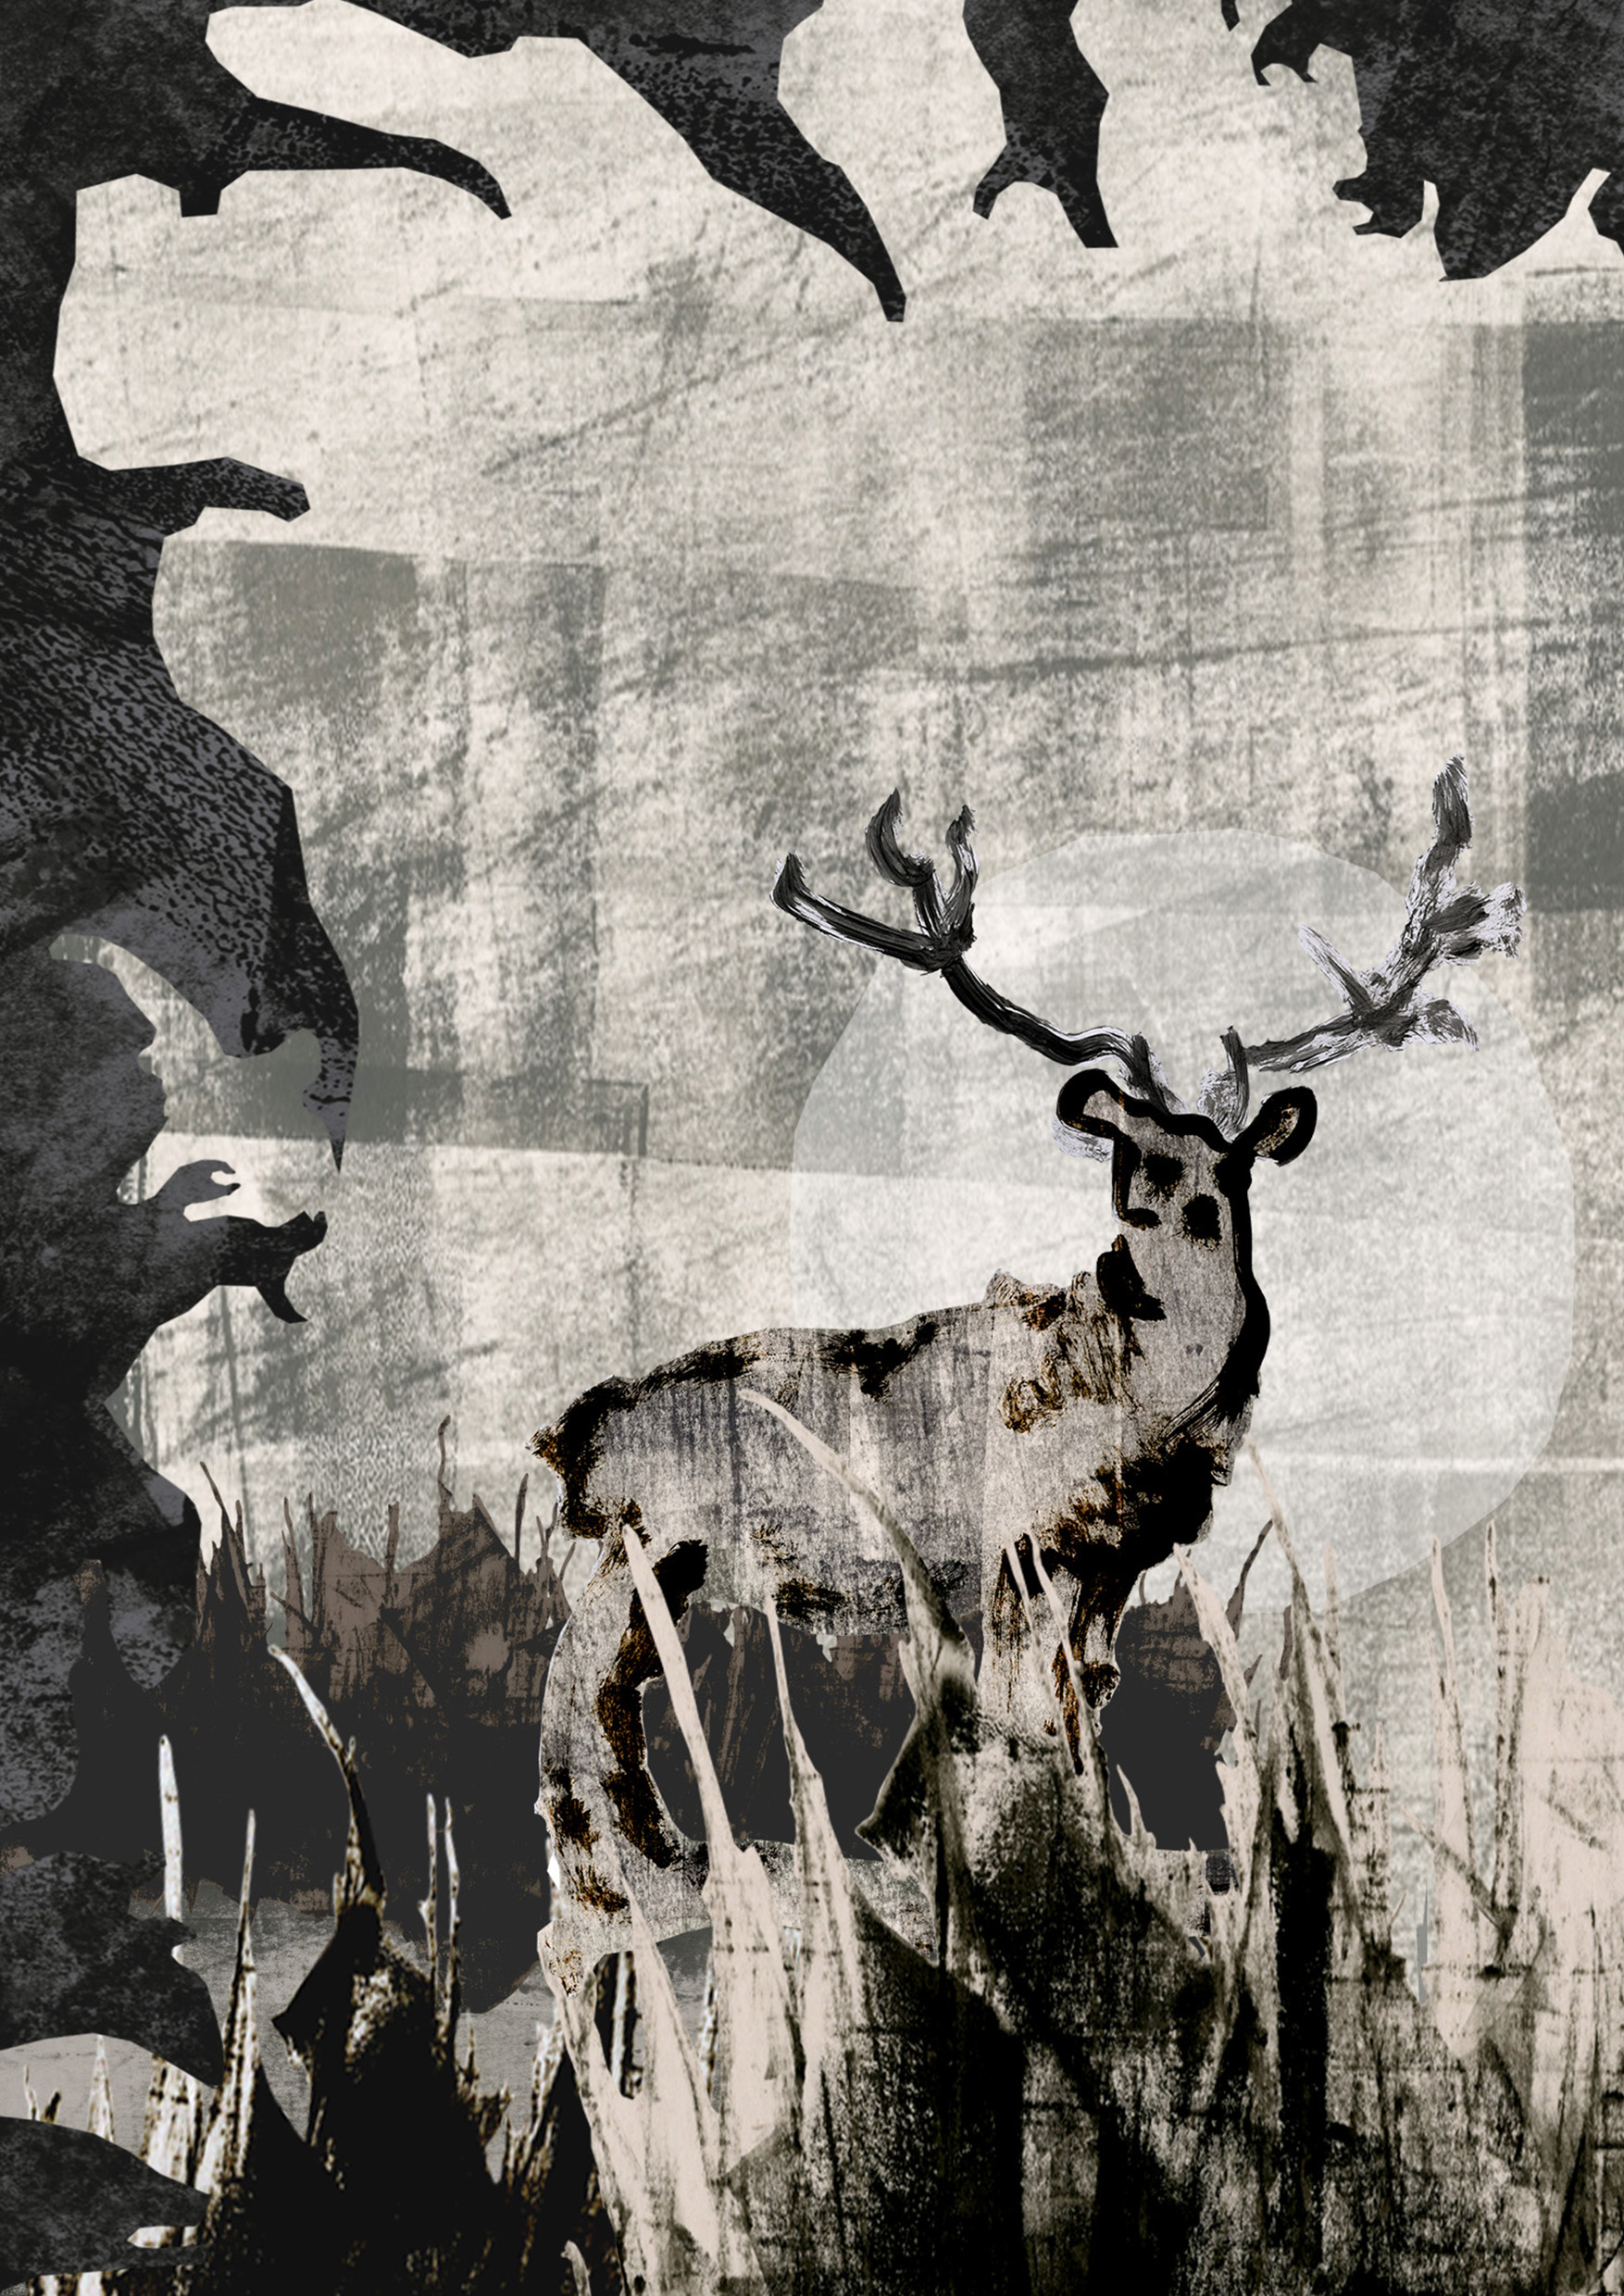 'The Secret History' book illustration by Simon Maskell, showing a single page spread of a deer discovered in the dark at night, outlined by the moon.